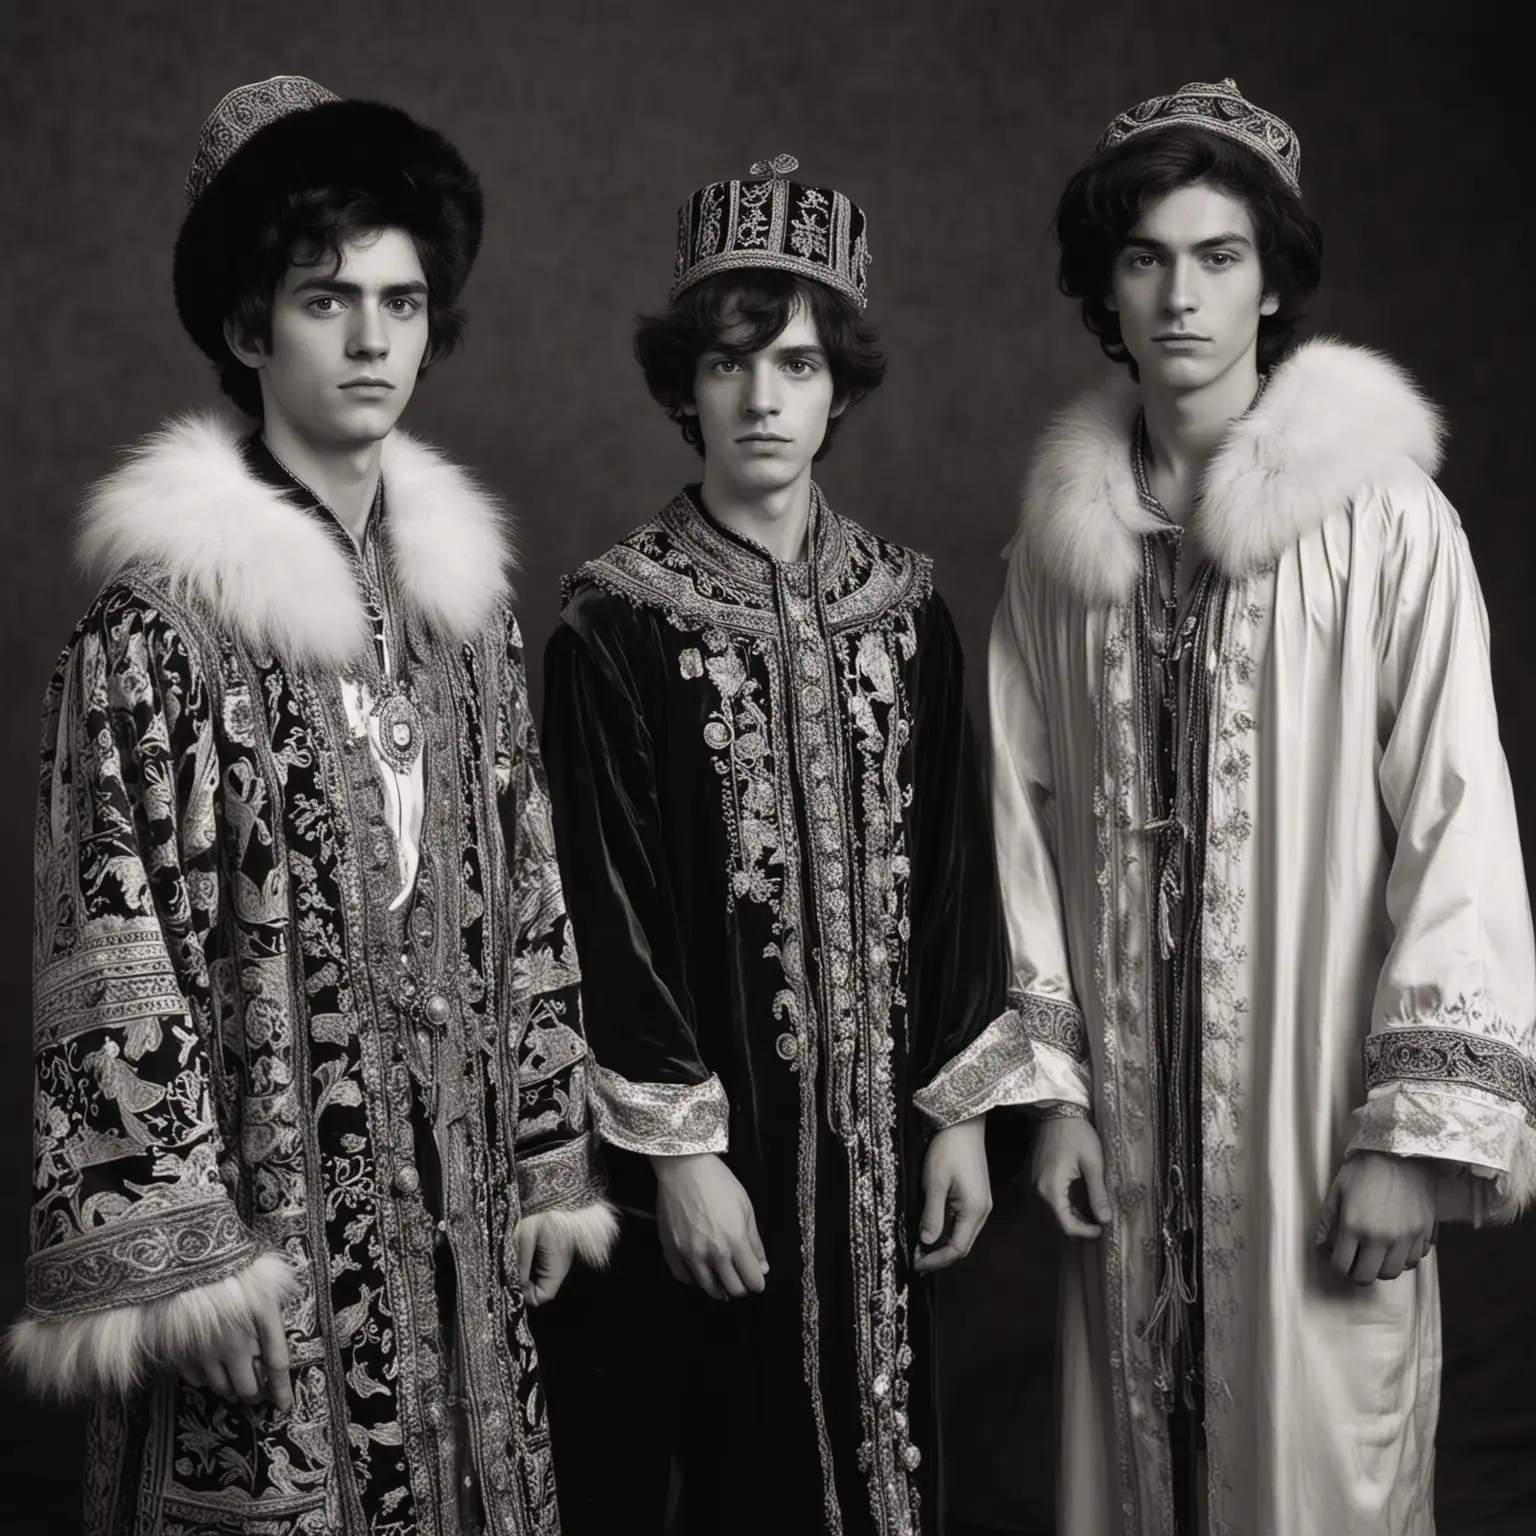 Black and white; two unattractive young men stand side by side; they both wear ornamental robes like philosophers and have fur collars; one wears a fez hat and one has long hair; behind them is an unattractive woman who is skinny with black hair in a tight blouse